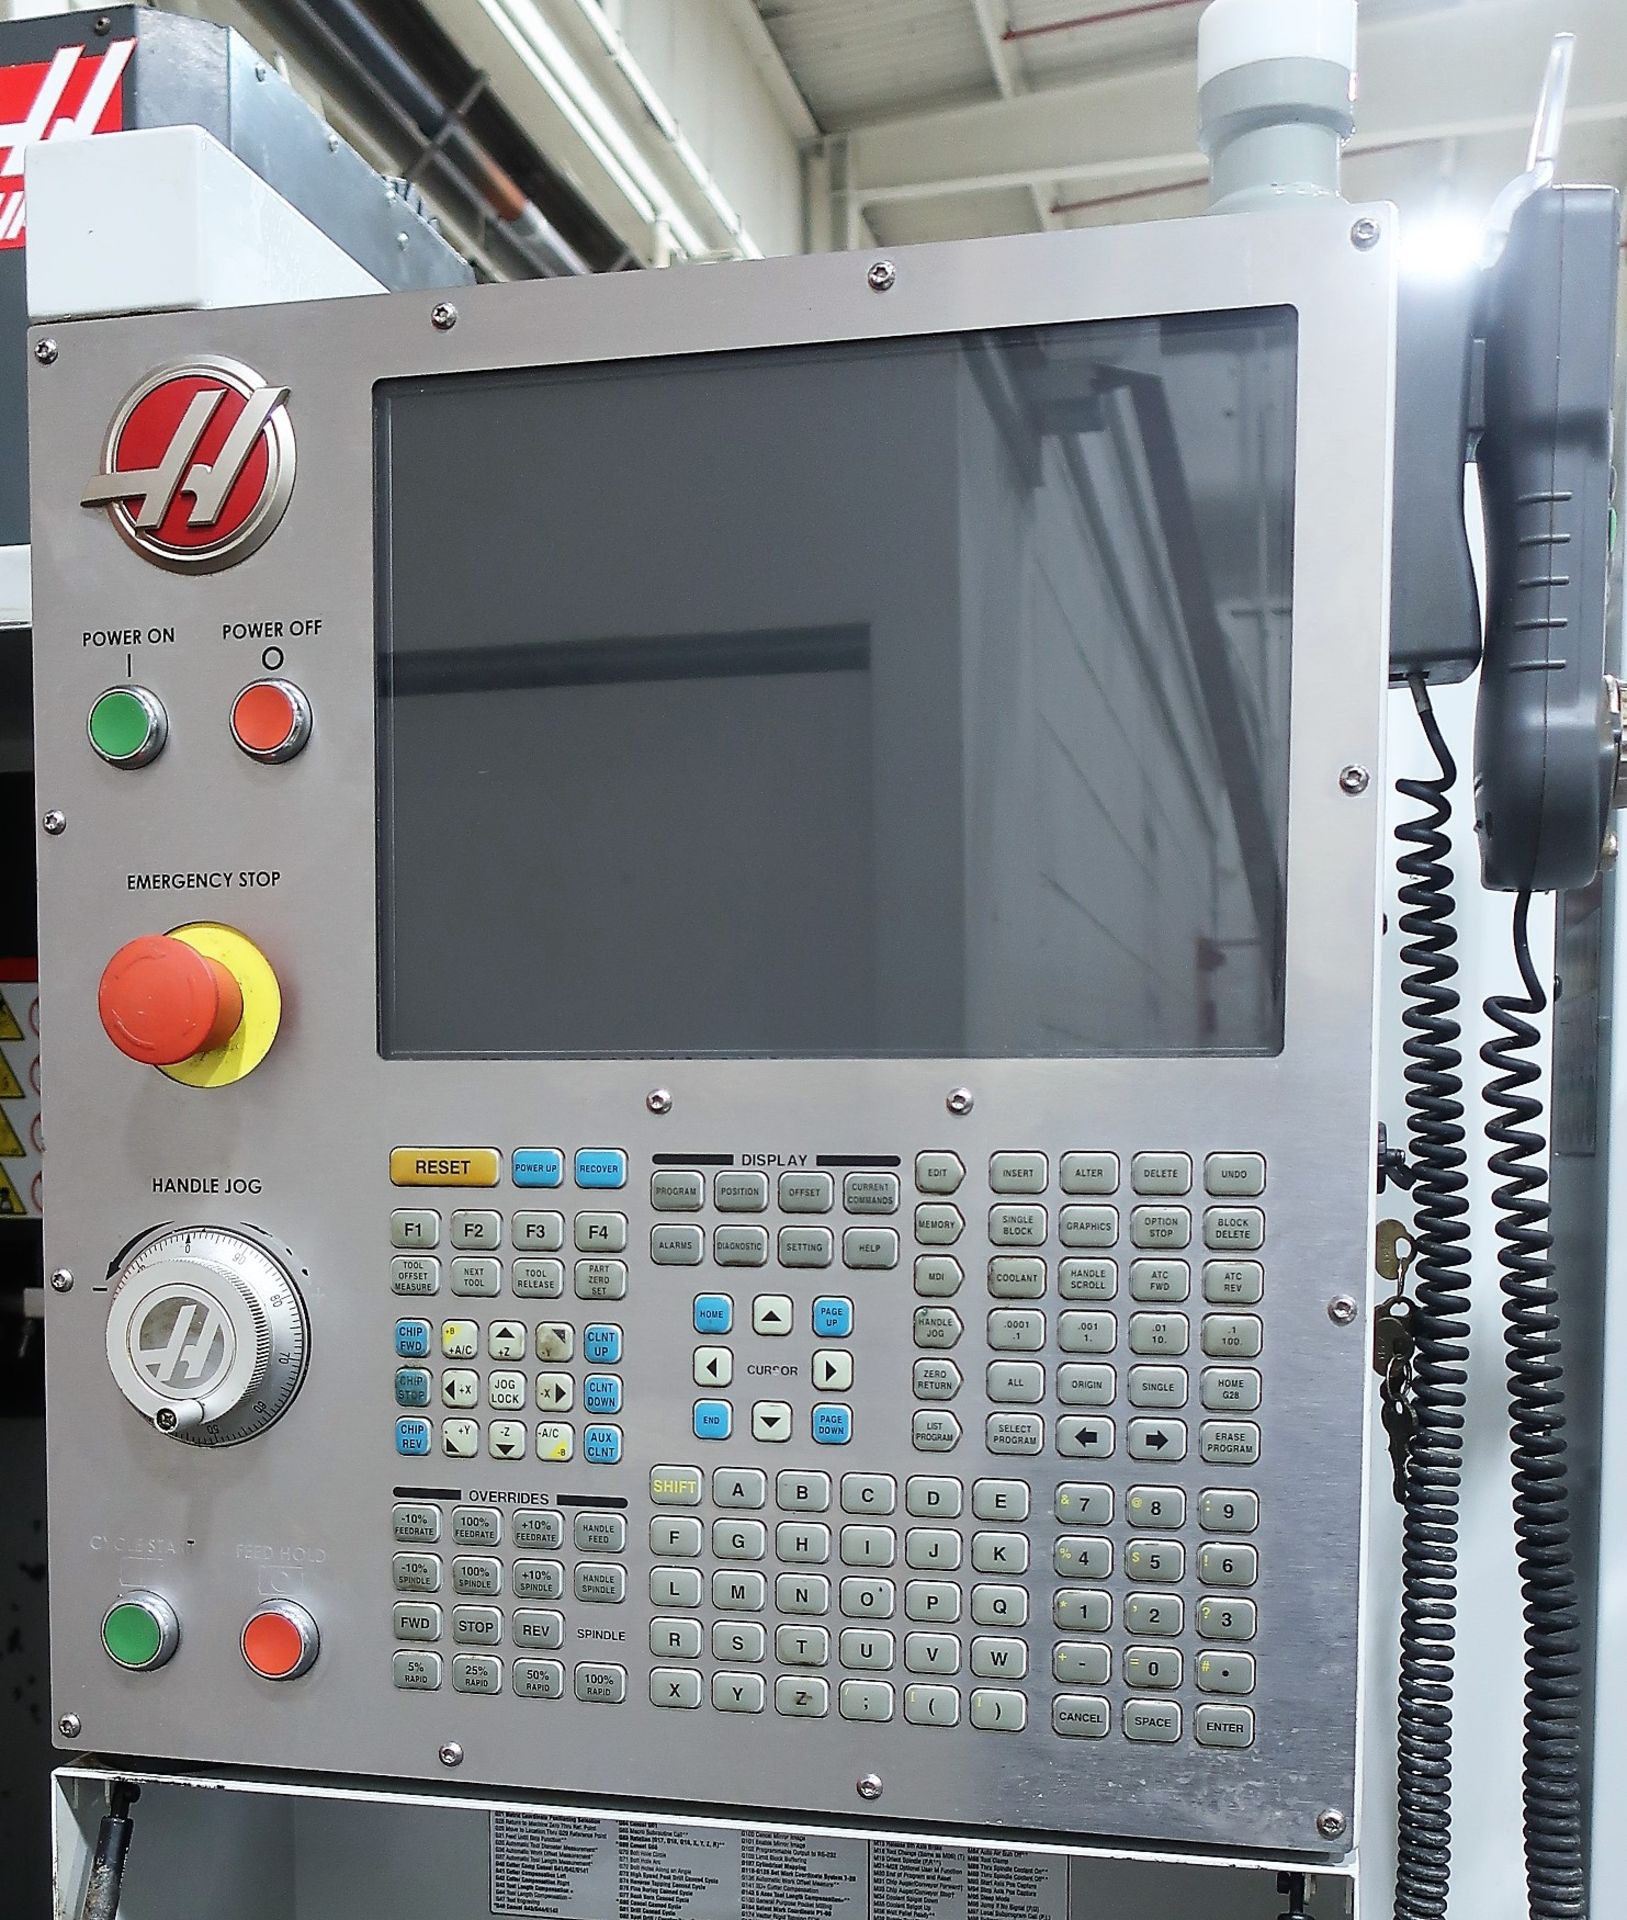 Haas DT-2 4-Axis CNC Drill/Tap/Mill Vertical Machining Center, SN 1135274, New 12/2016 - Image 2 of 9